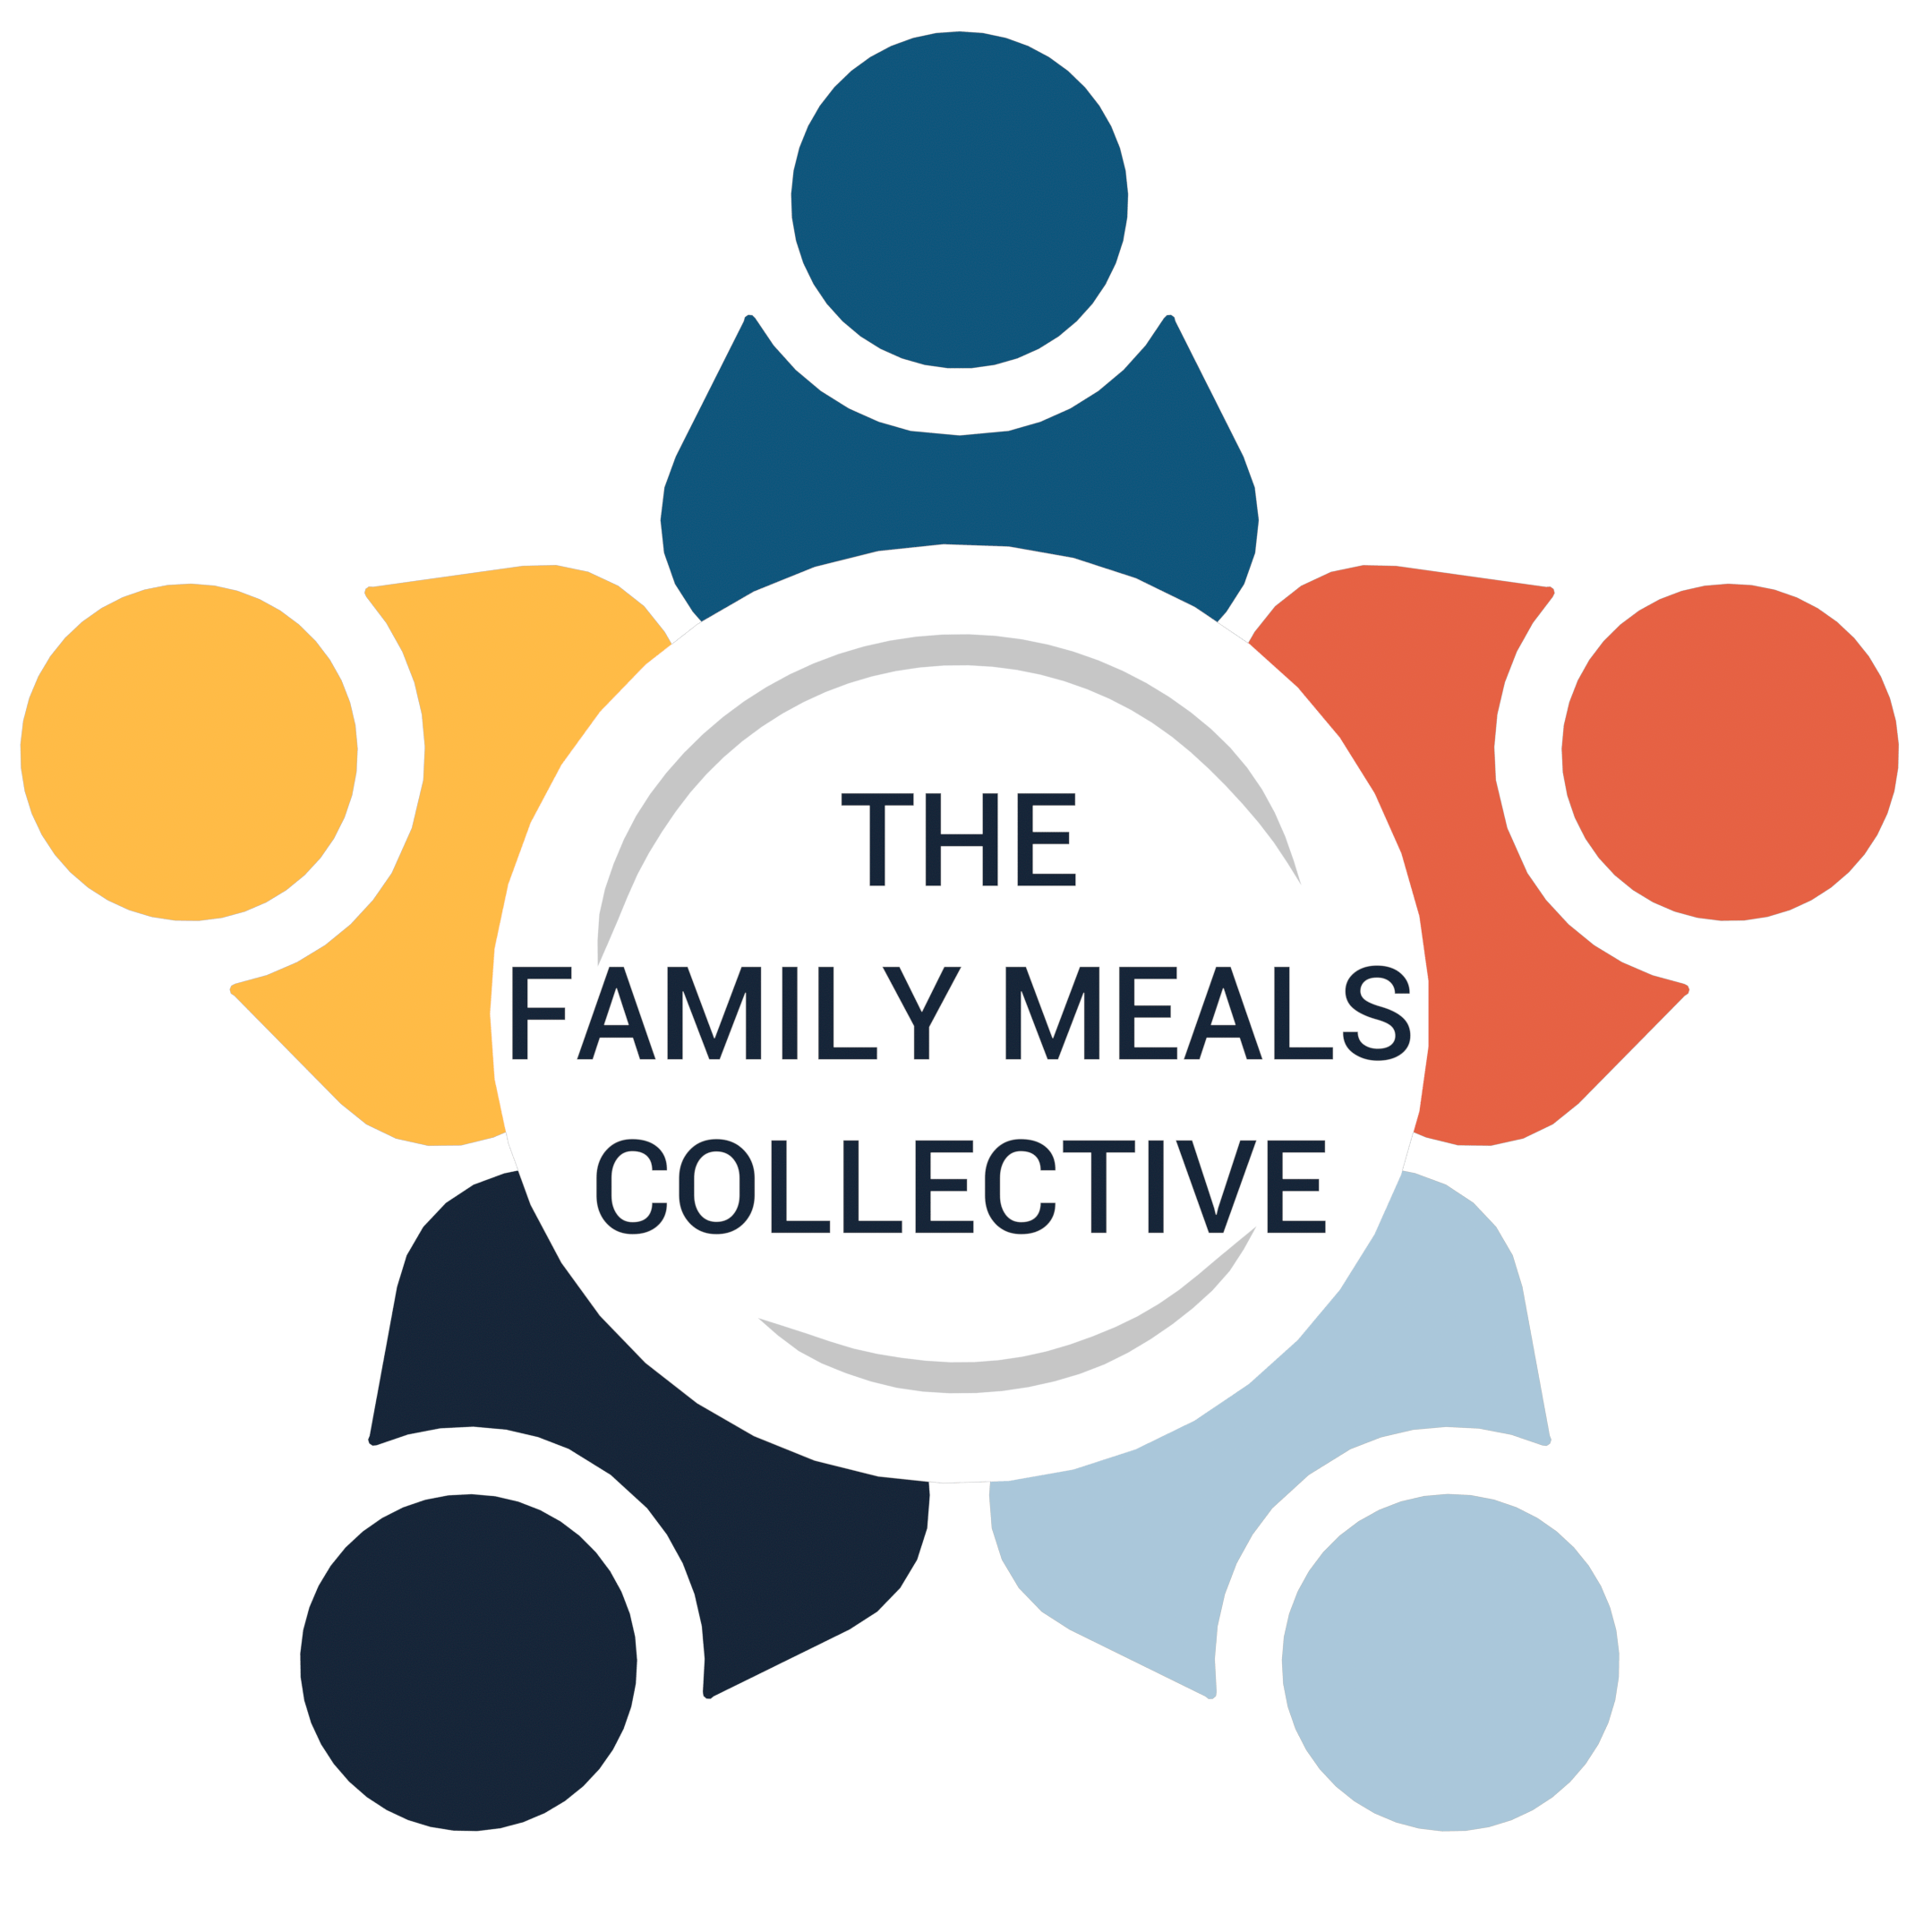 The Family Meals Collective